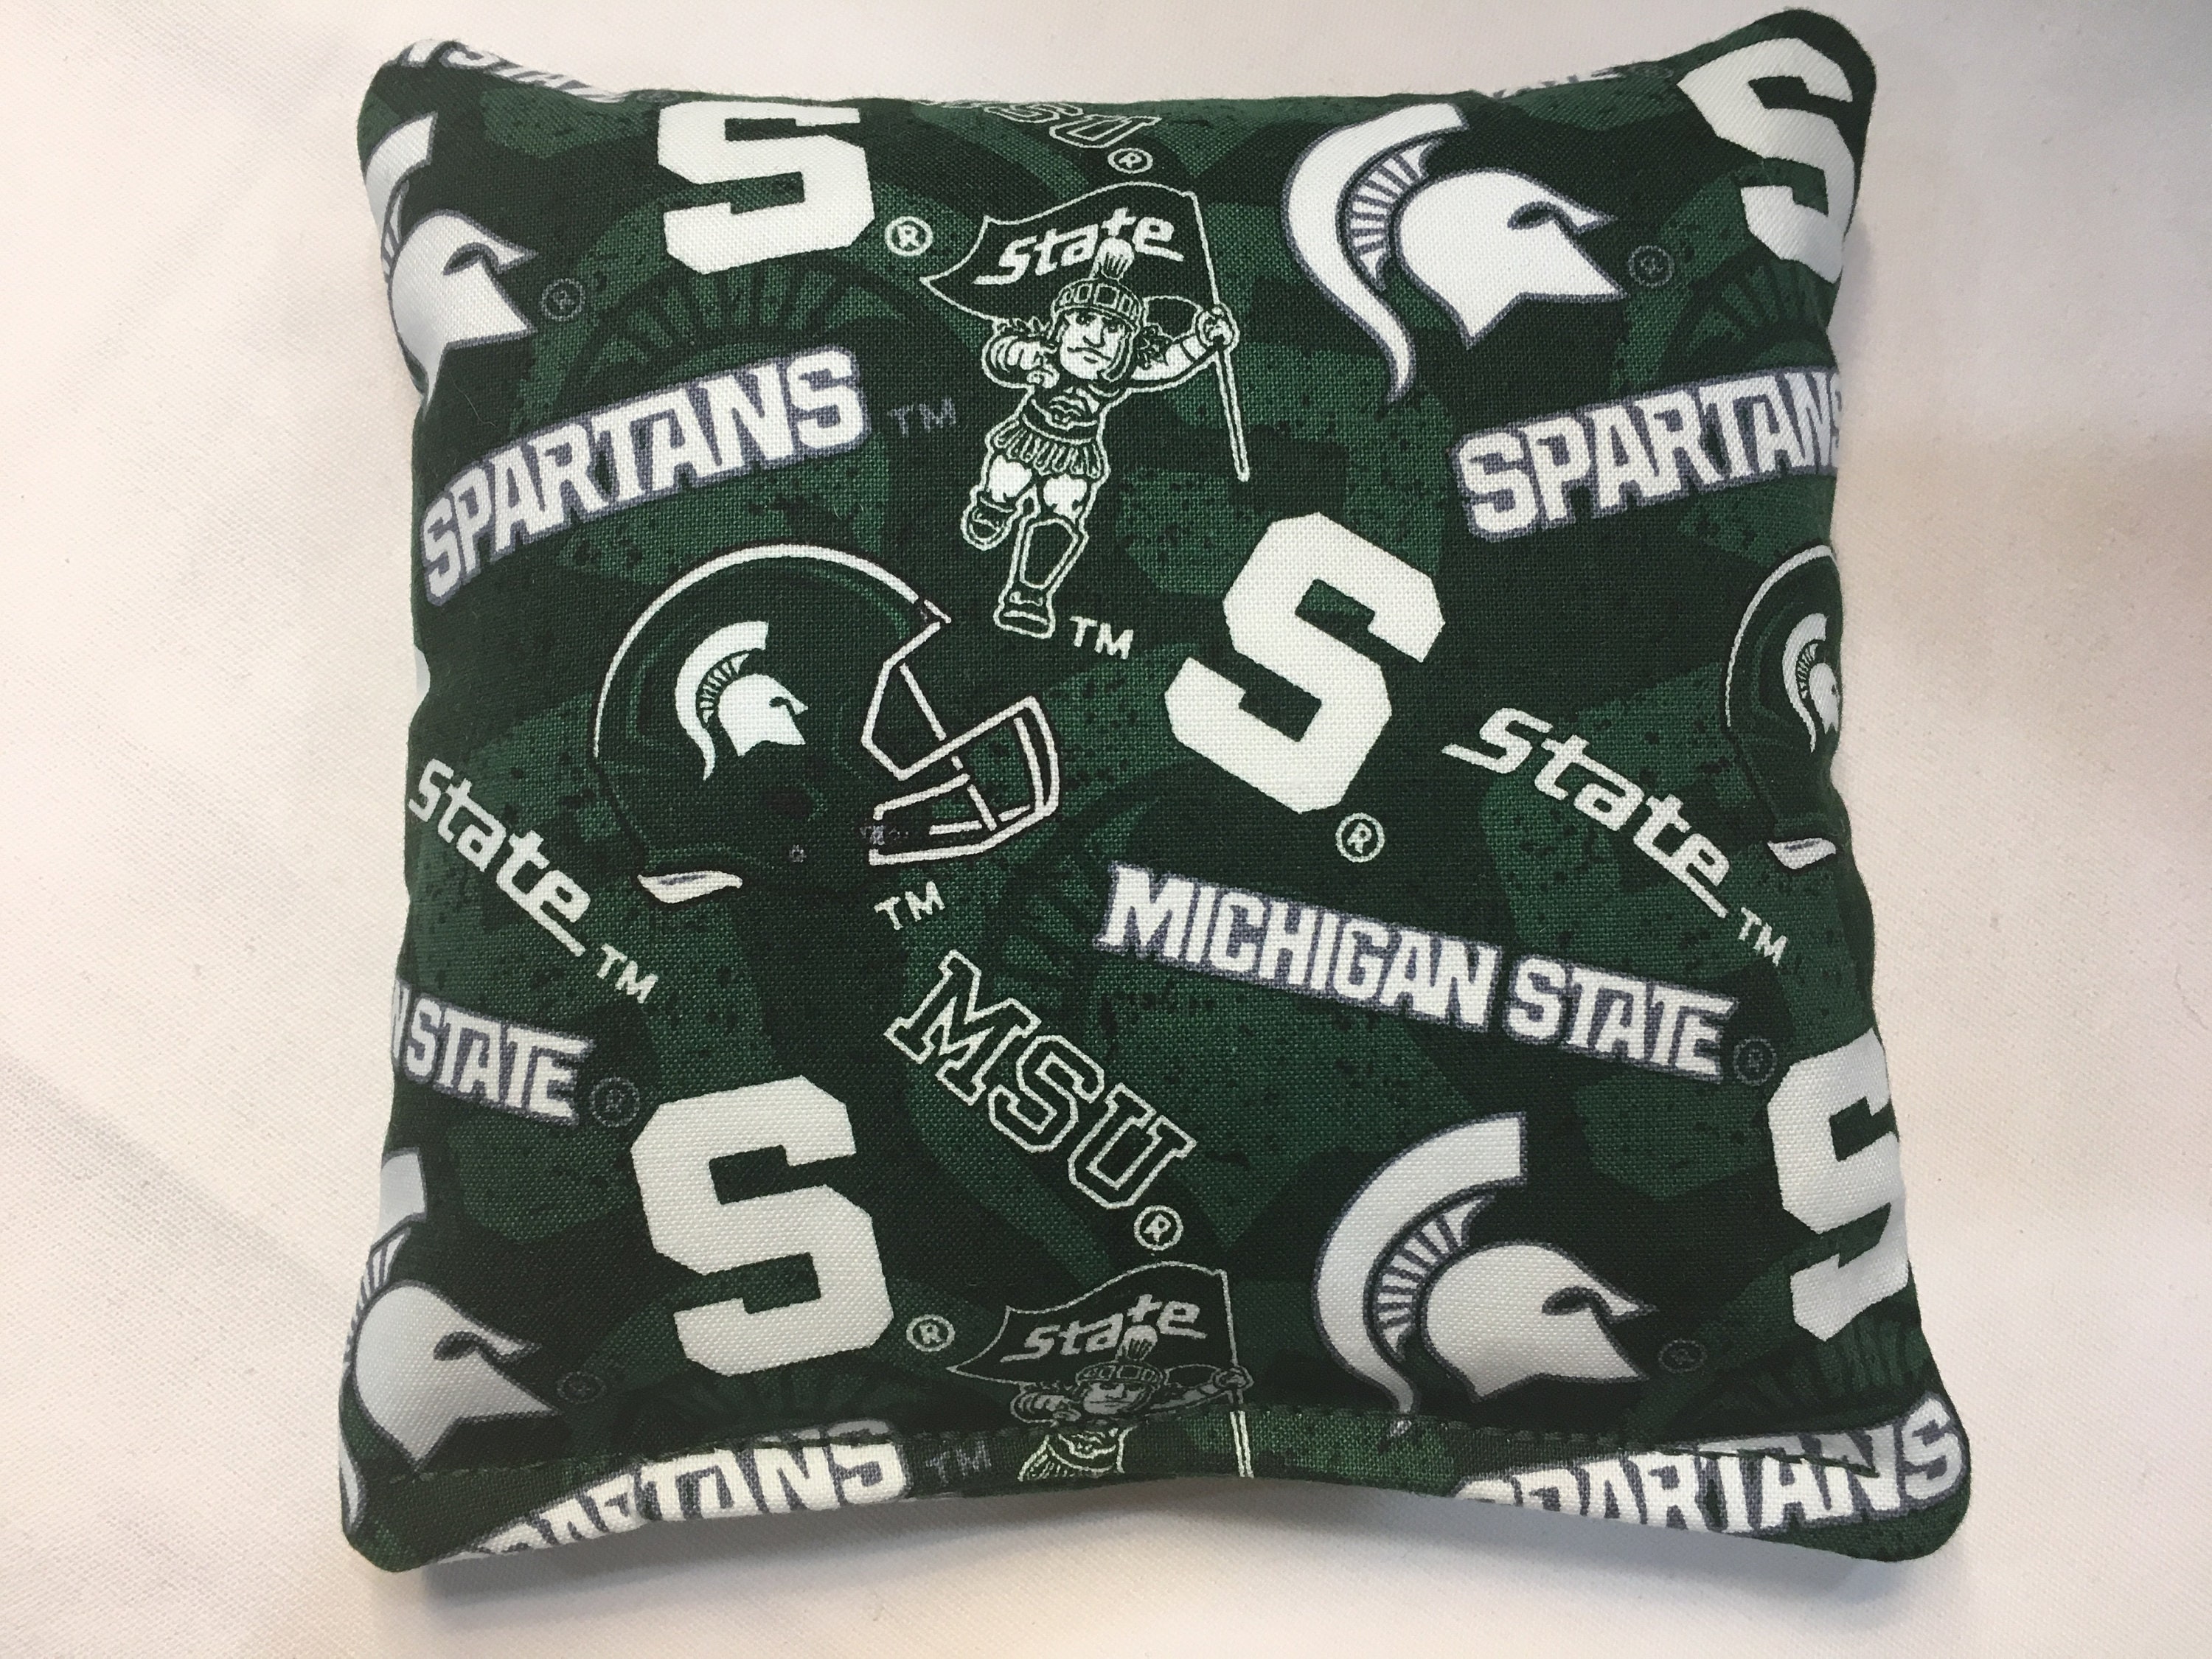 MICHIGAN STATE SPARTANS CORNHOLE BEAN BAGS SET OF 8 TOP QUALITY TOSS GAME 